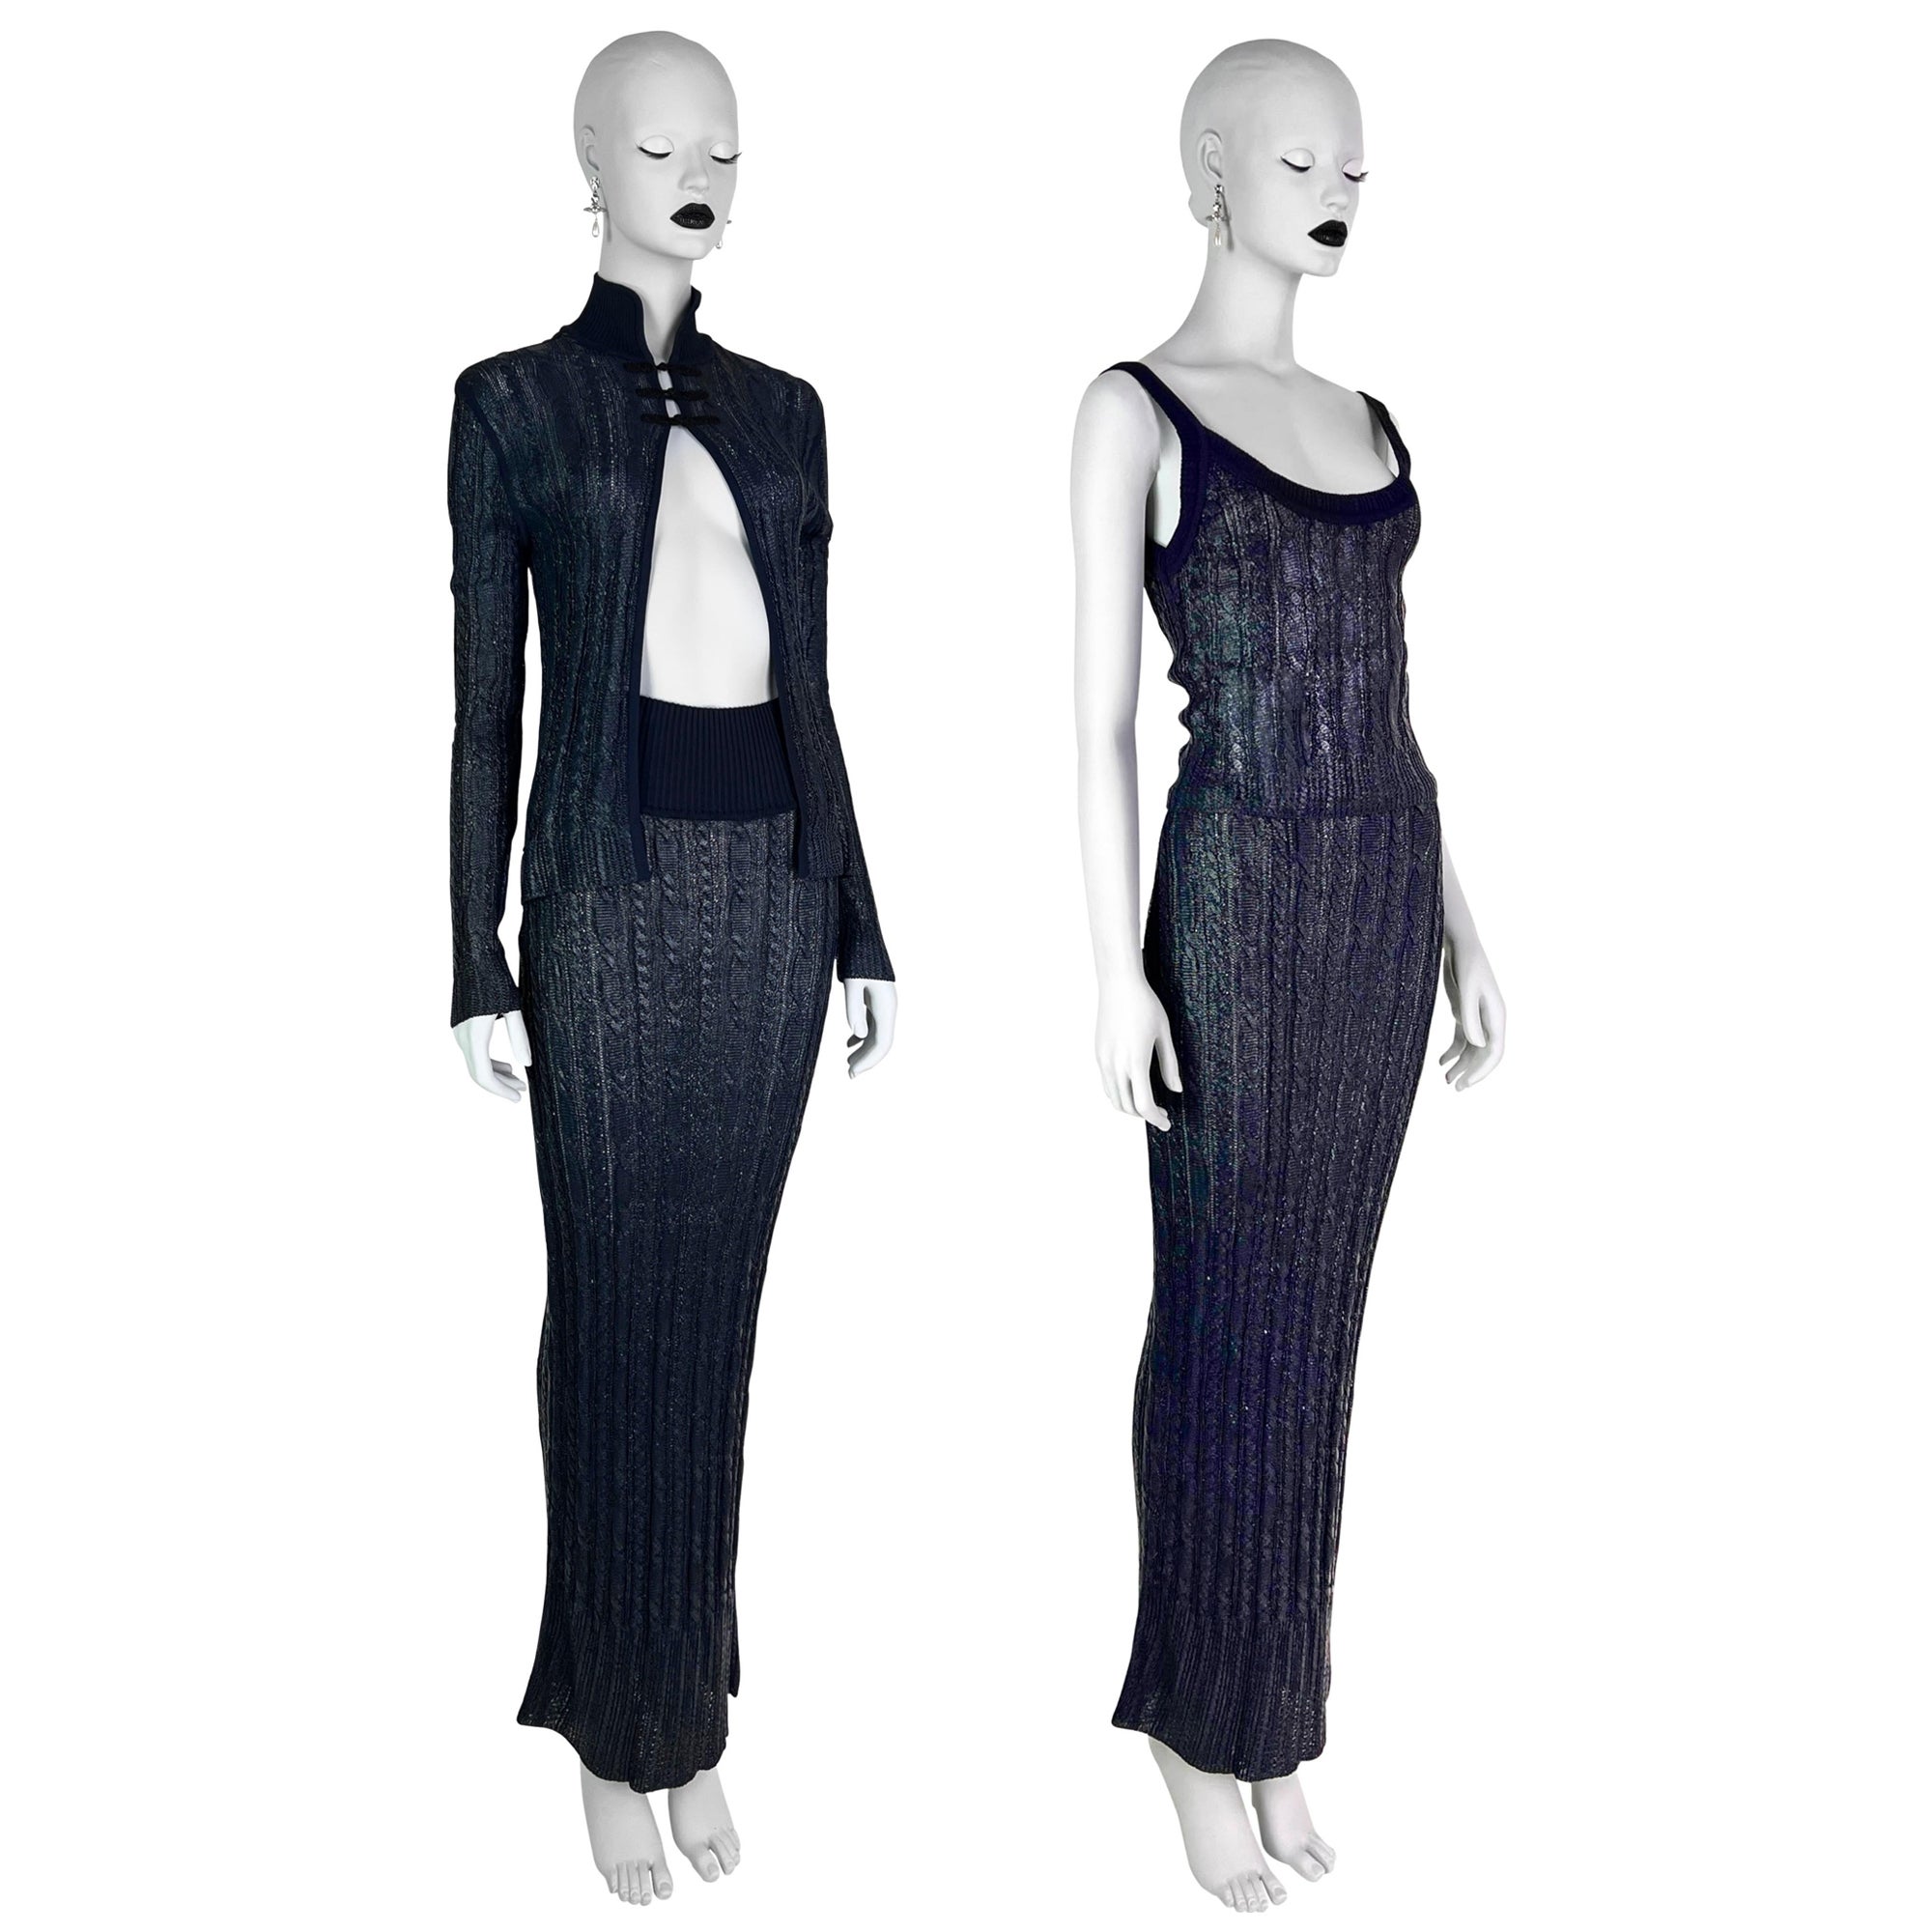 SS 1999 Dior by John Galliano RTW Rubber Knit 3-pieces ensemble For Sale